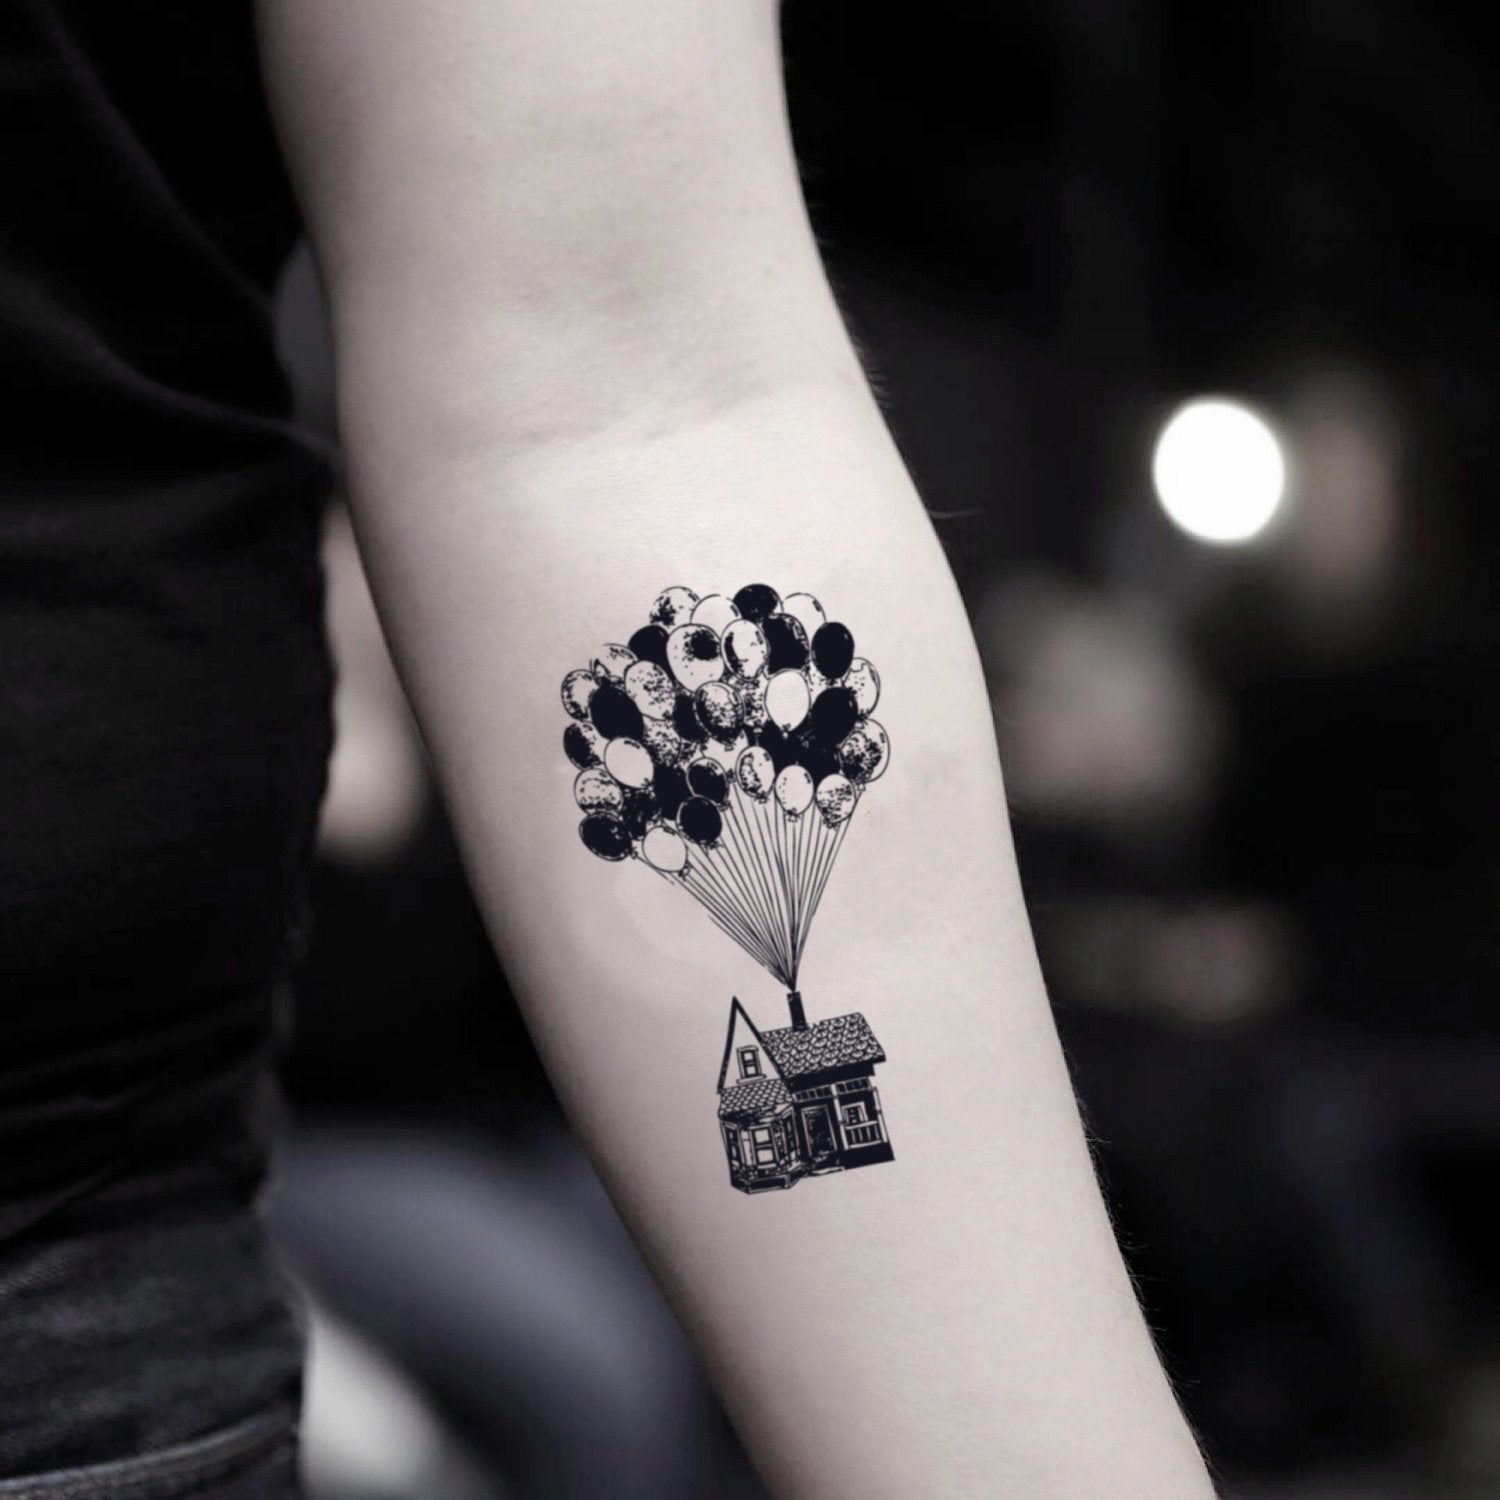 Balloon tattoo by Andrea Morales | Post 29112